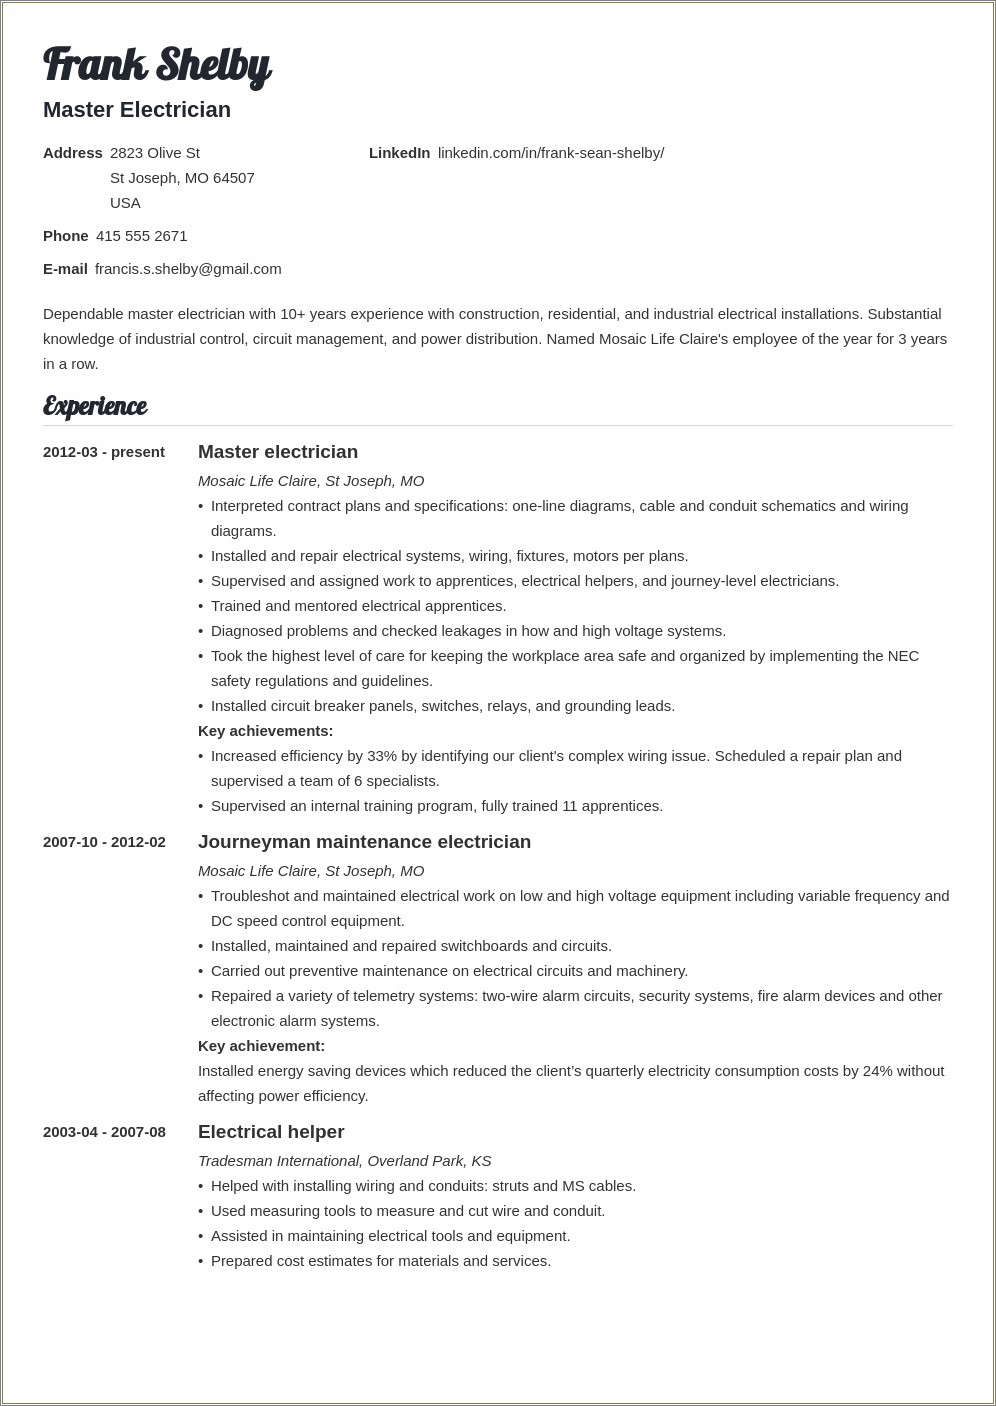 Importance Of Using Descriptive Words On Resume